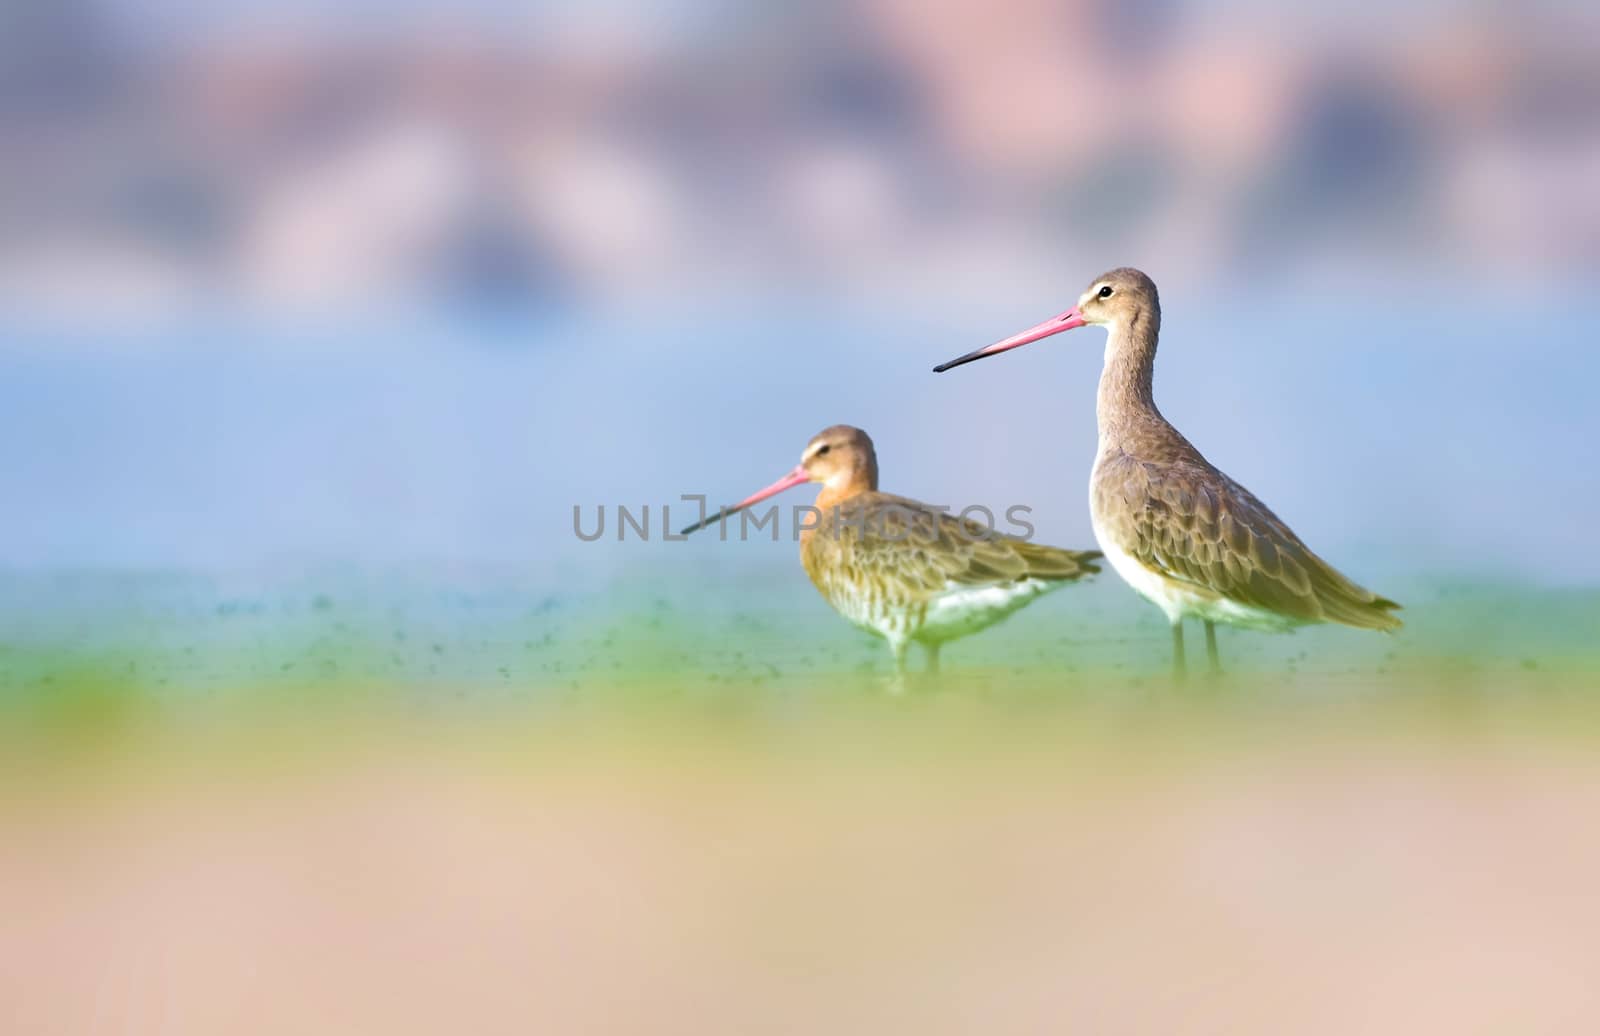 Black-tailed godwit along with pair by rkbalaji